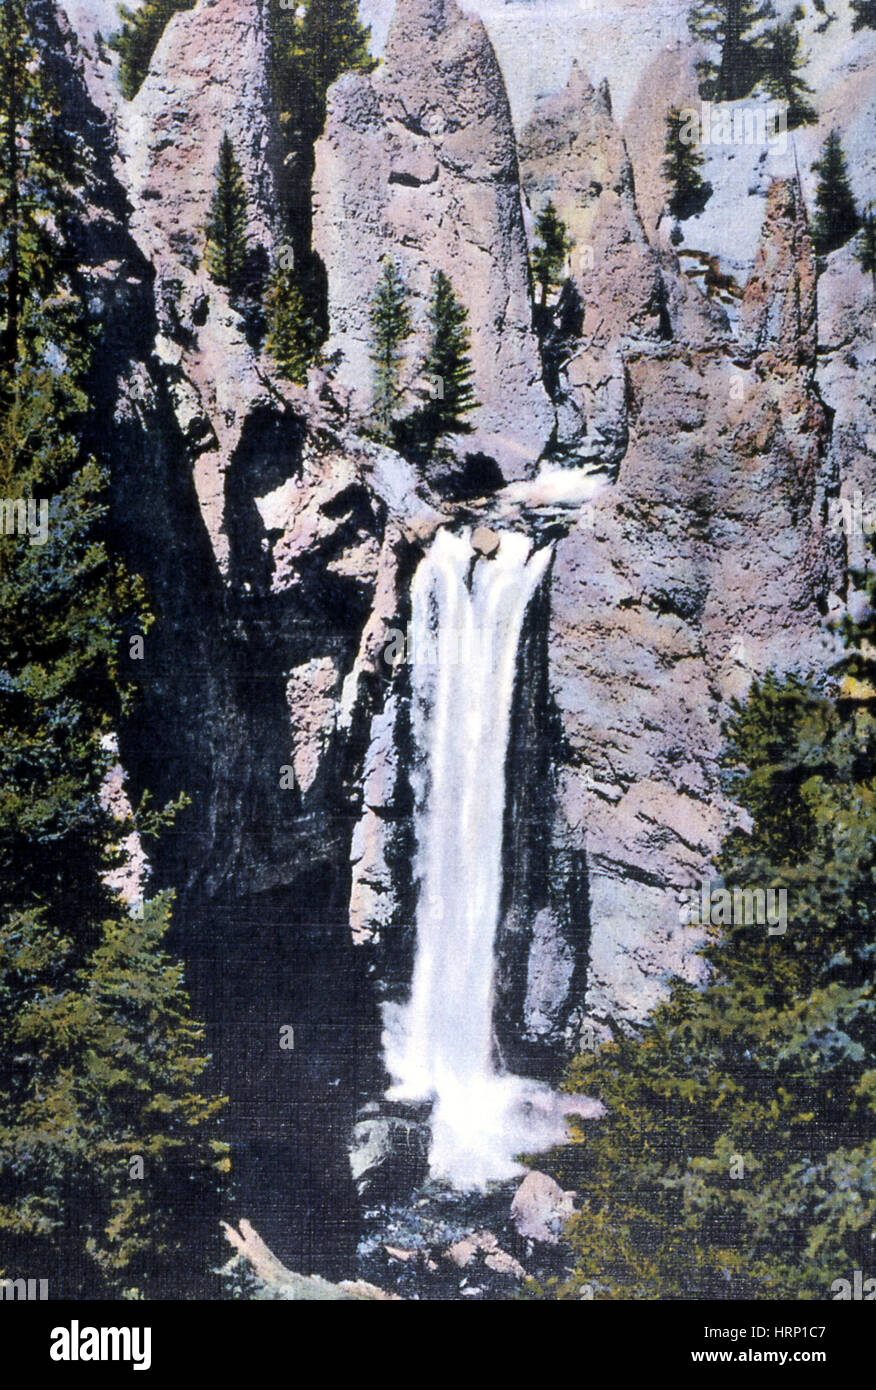 Tower Falls, Yellowstone NP, 20e siècle Banque D'Images